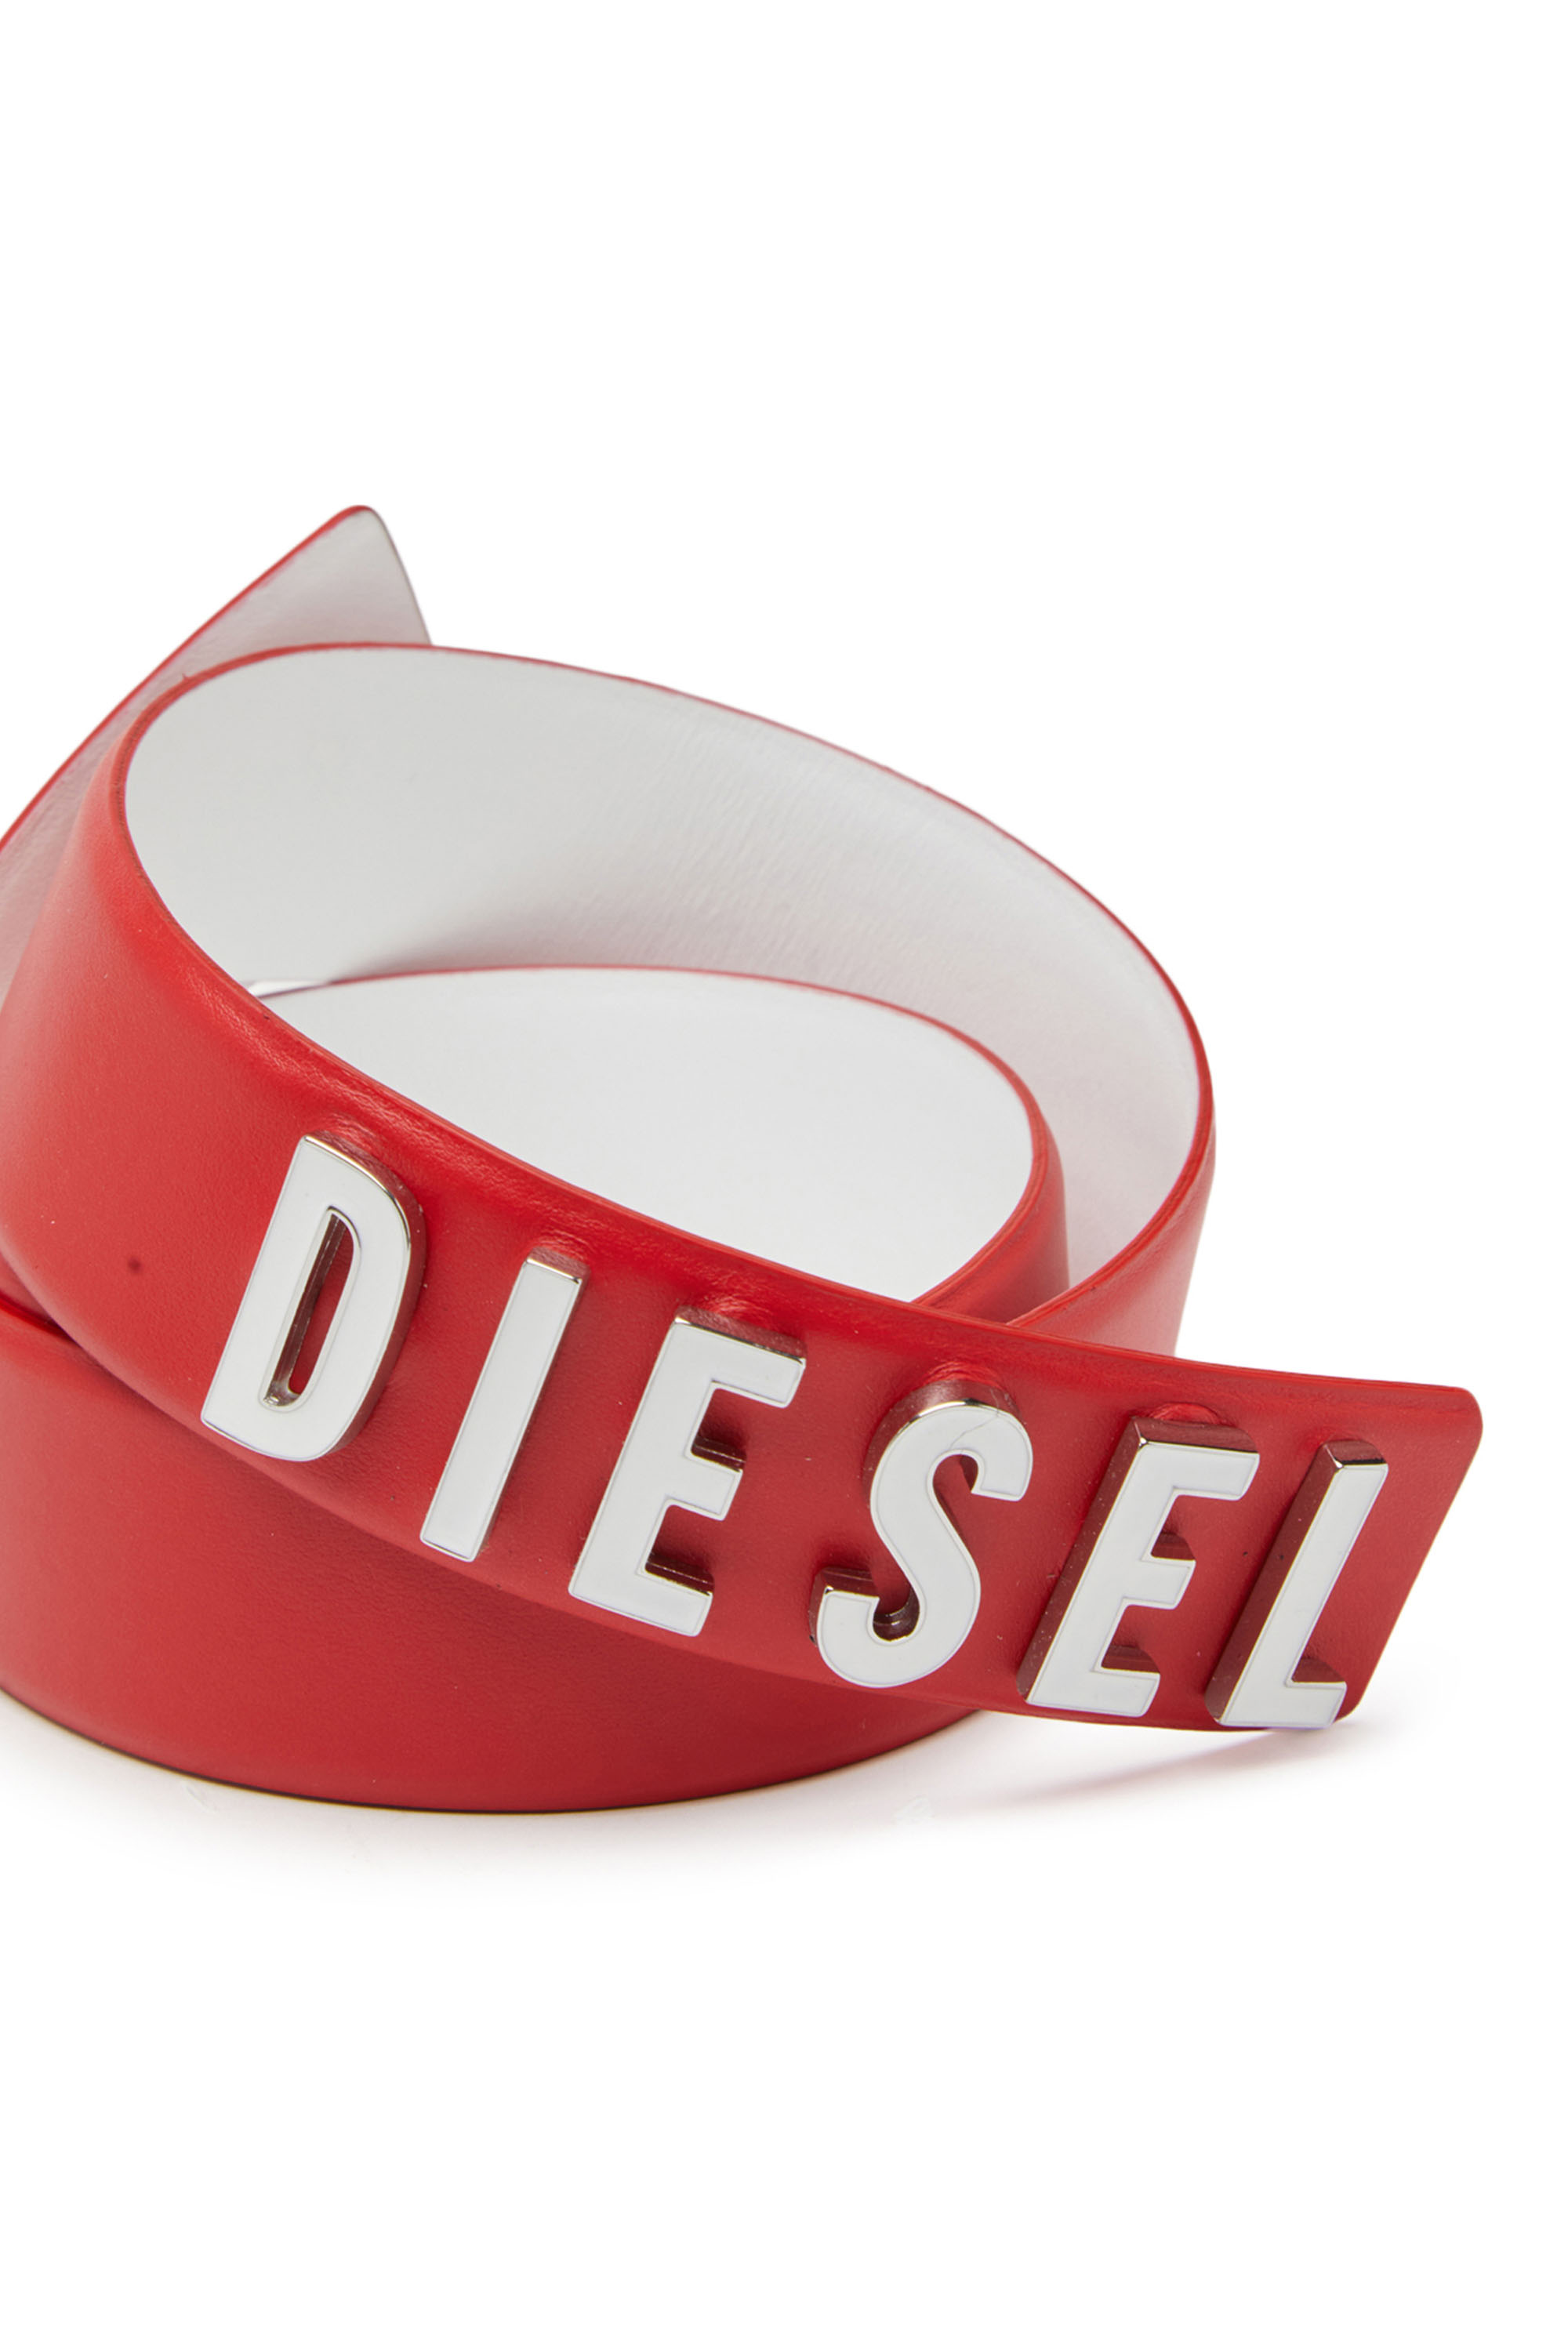 Diesel - B-LETTERS B, Rosso - Image 3